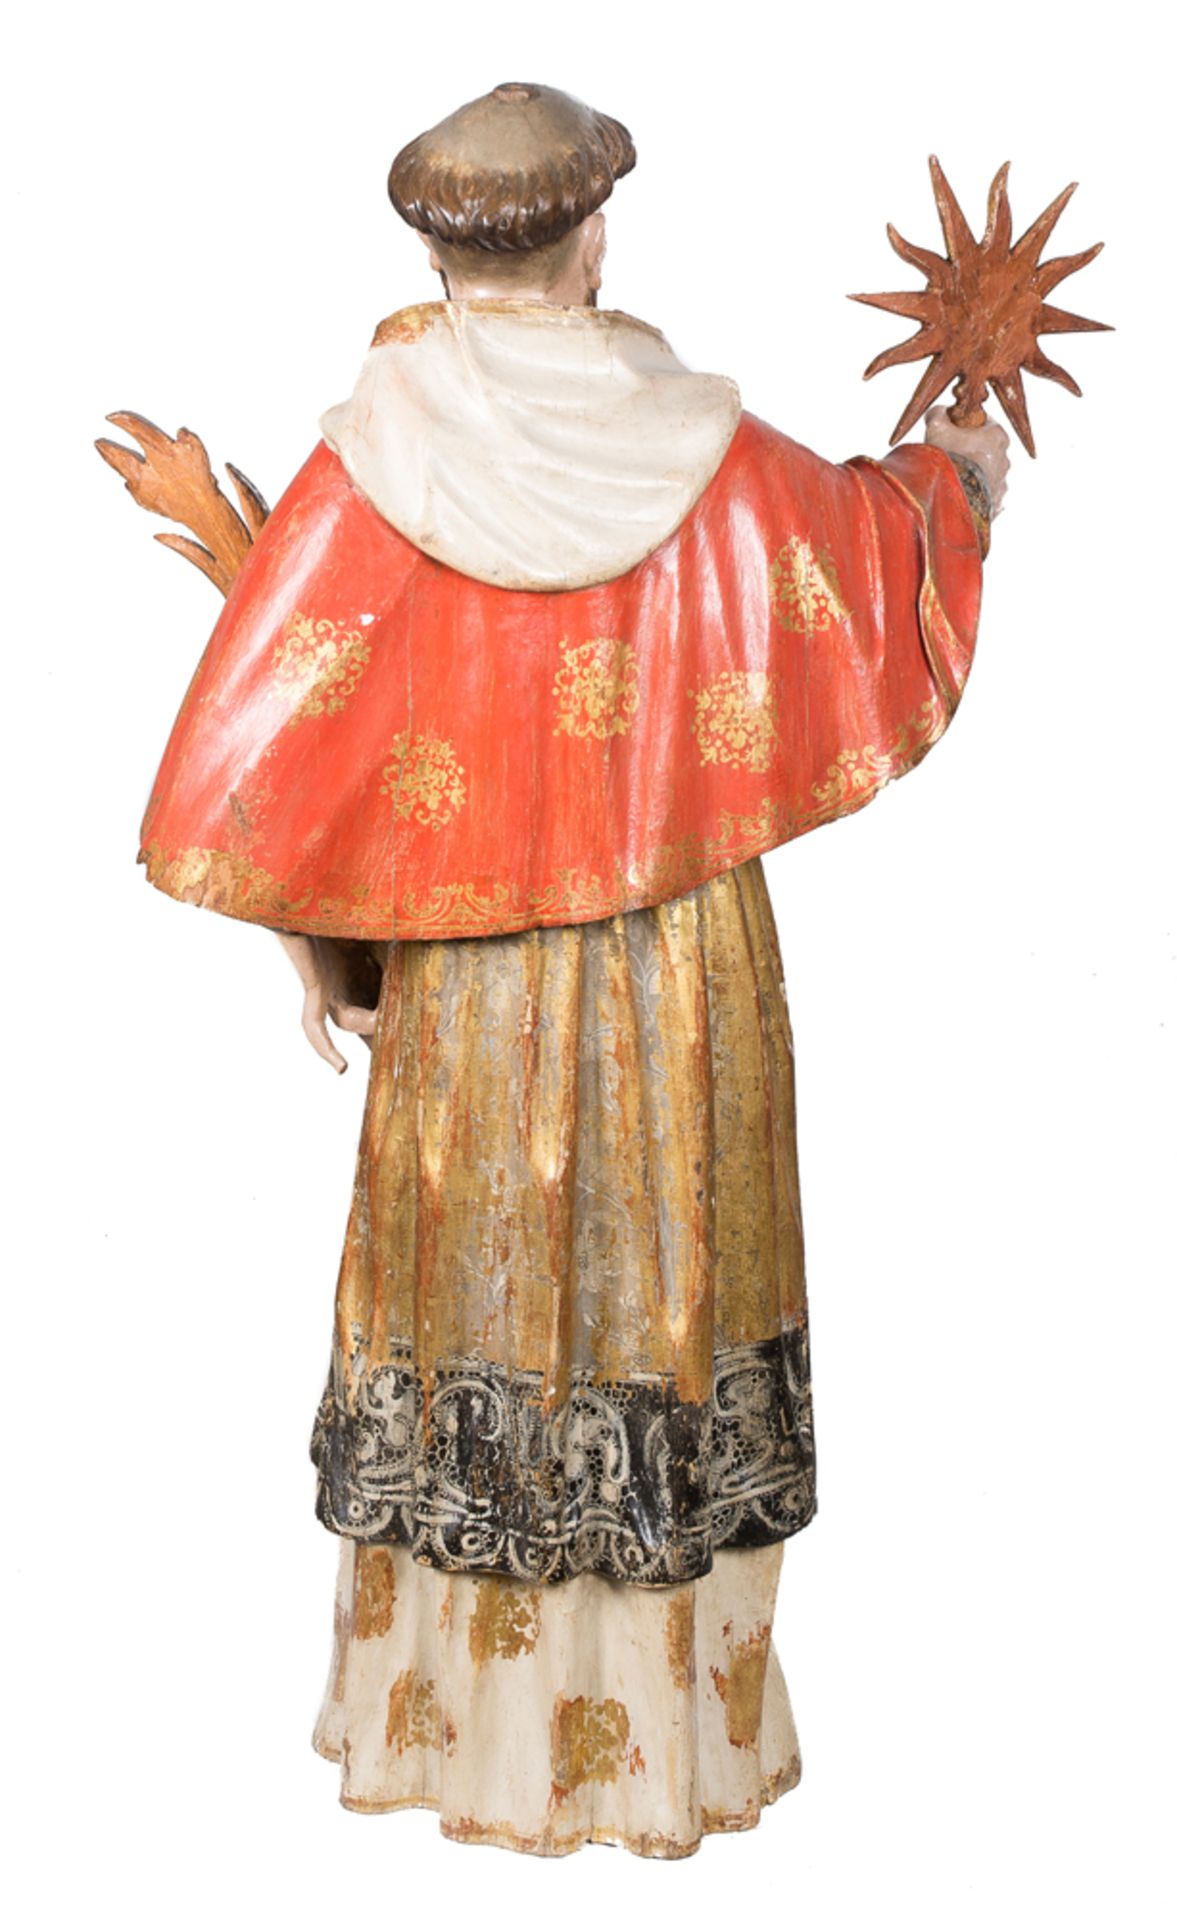 "Saint Raymond Nonnatus". Carved, gilded and polychromed wooden sculpture. Murcia School. 18th centu - Image 5 of 5